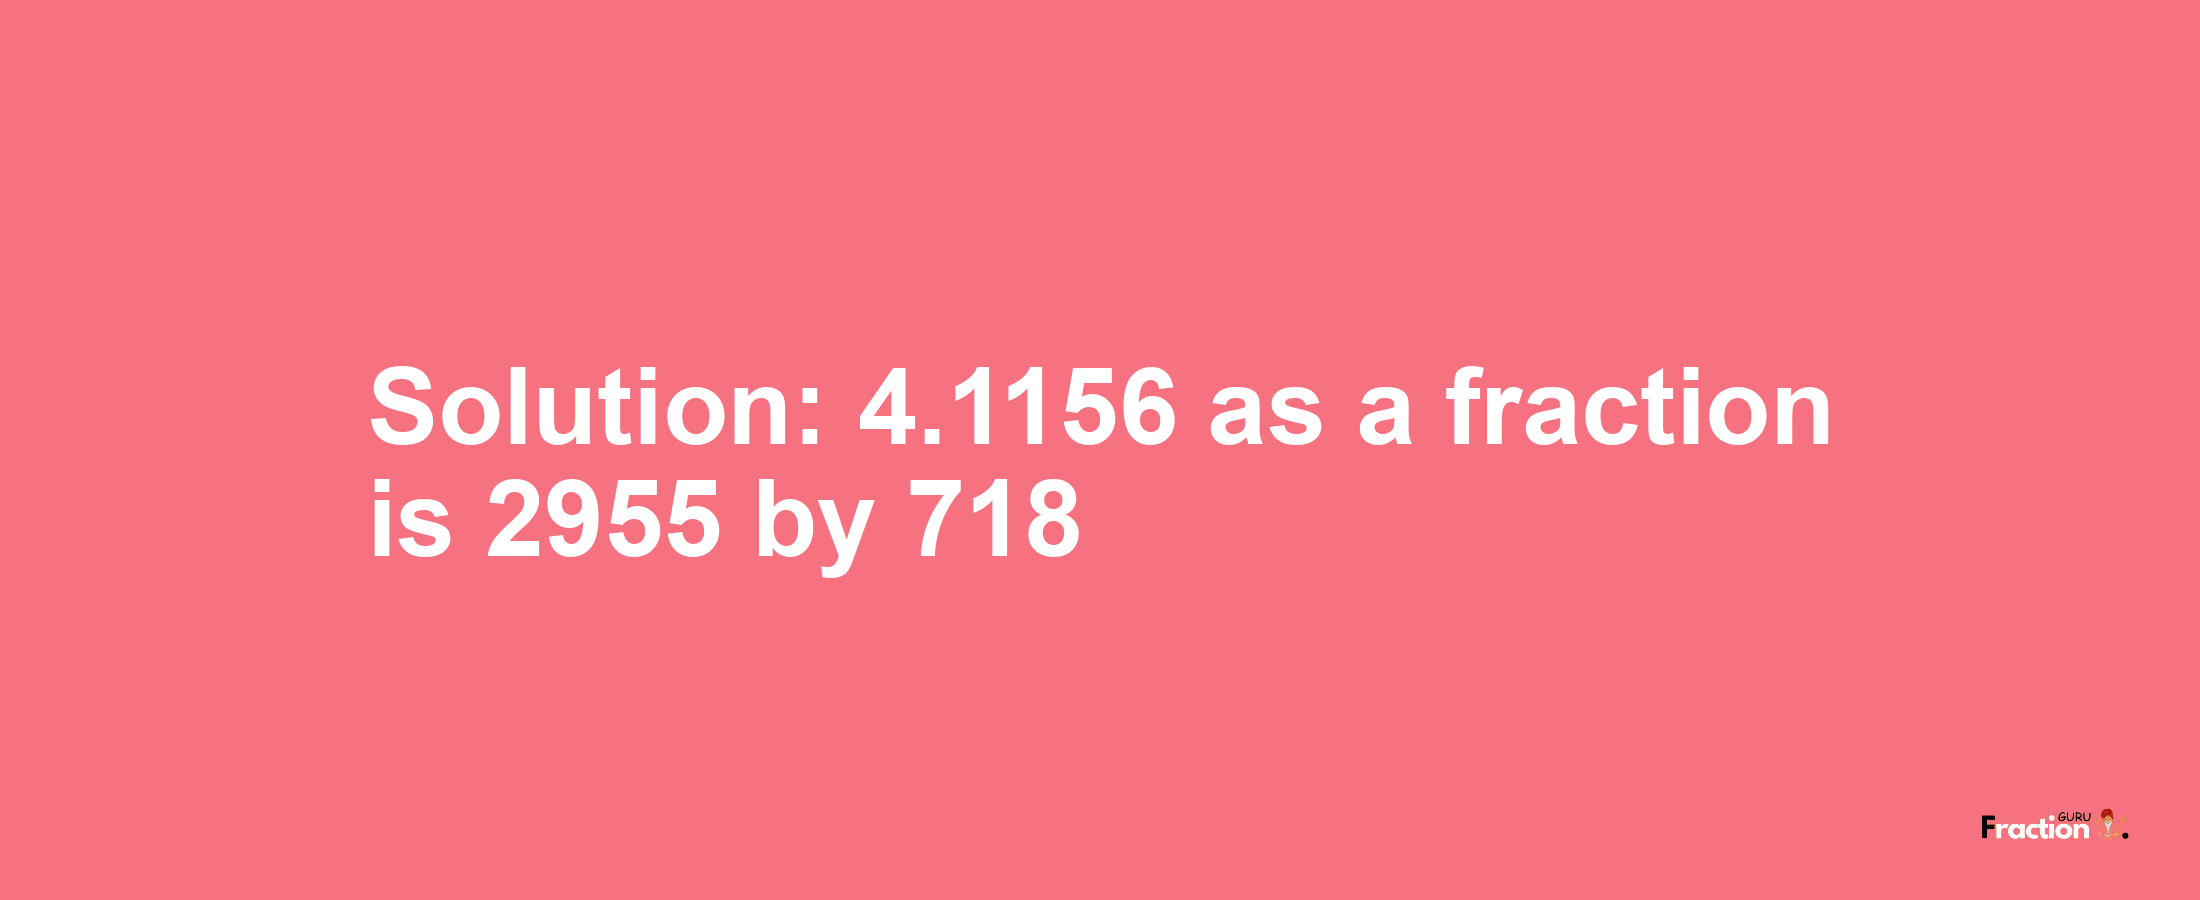 Solution:4.1156 as a fraction is 2955/718